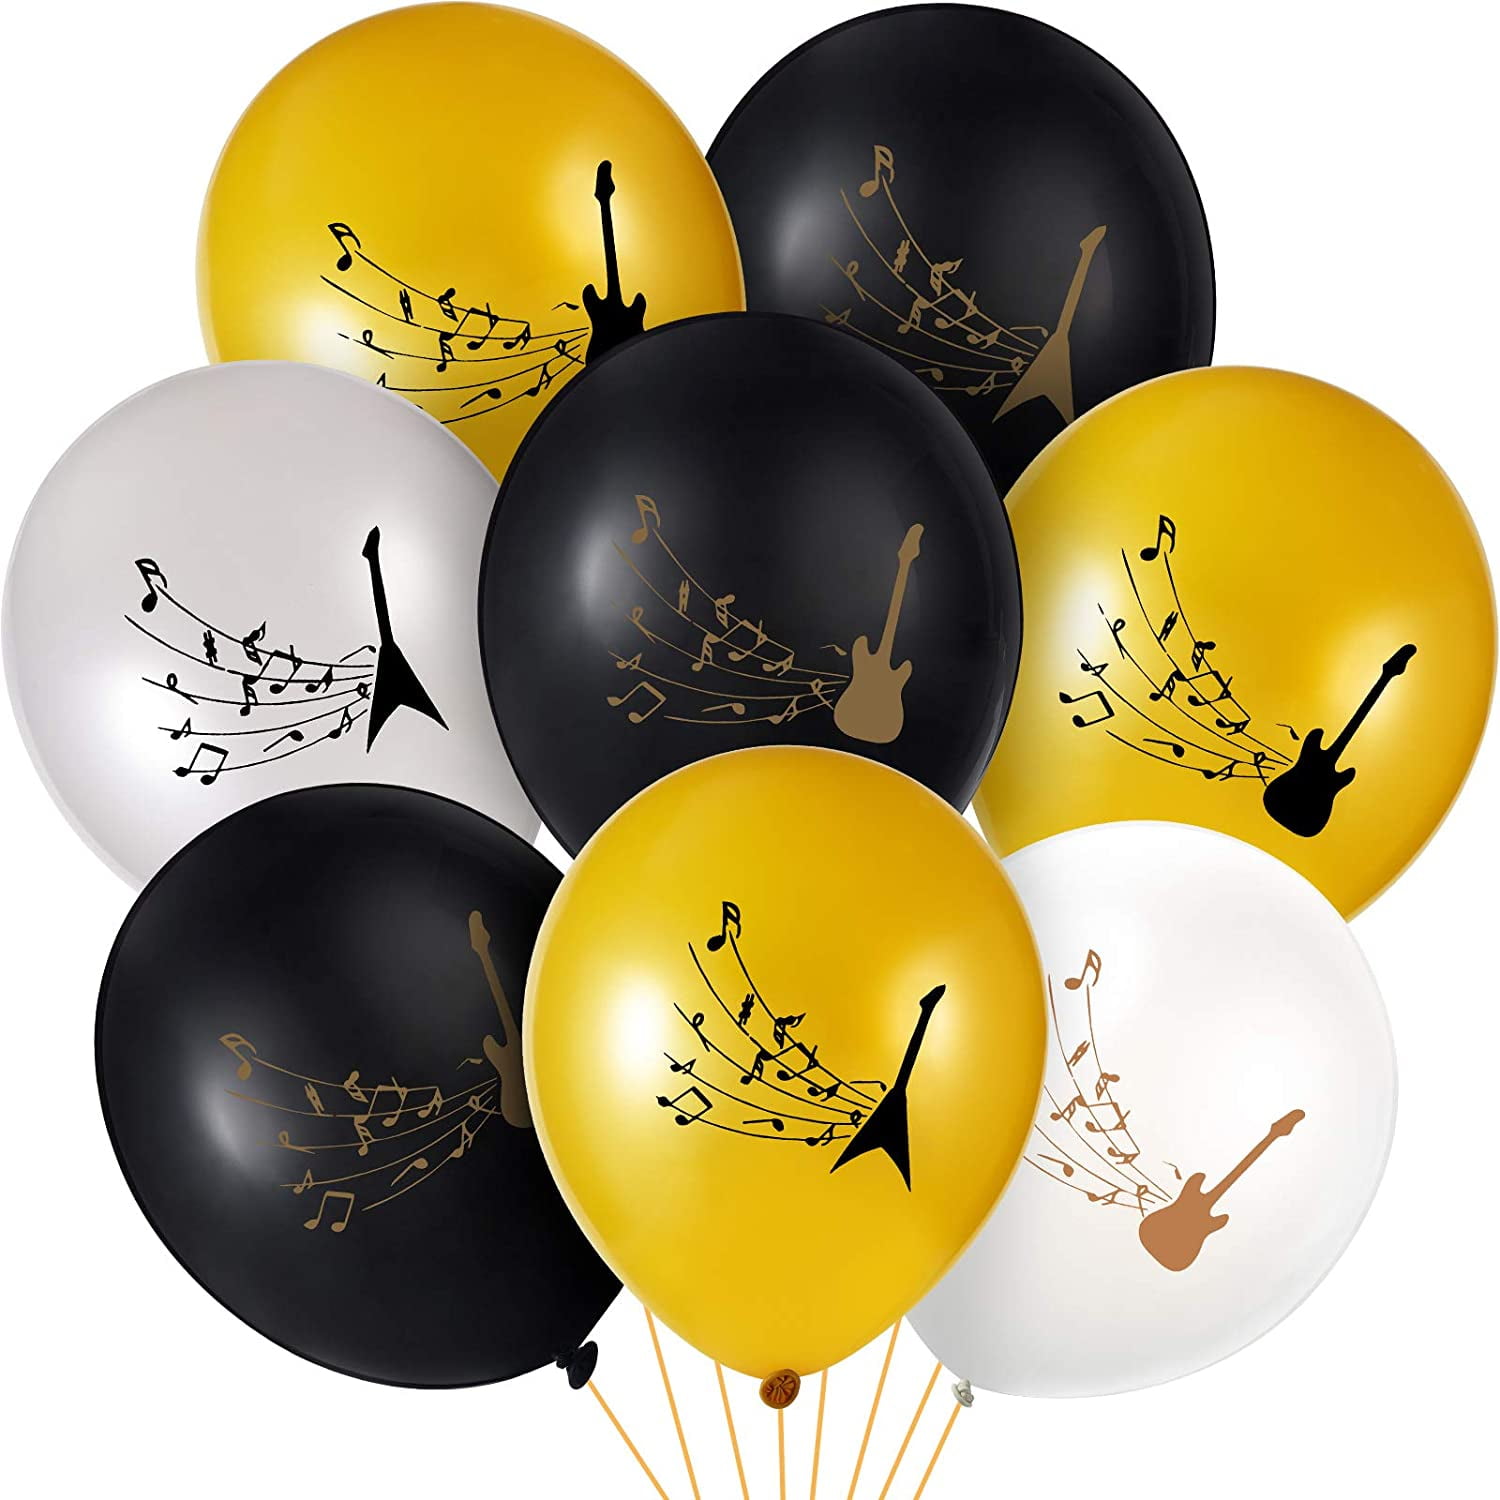 Details about   40 PCS 12" Latex Balloons Set Birthday Wedding Party Home Decoration with Ribbon